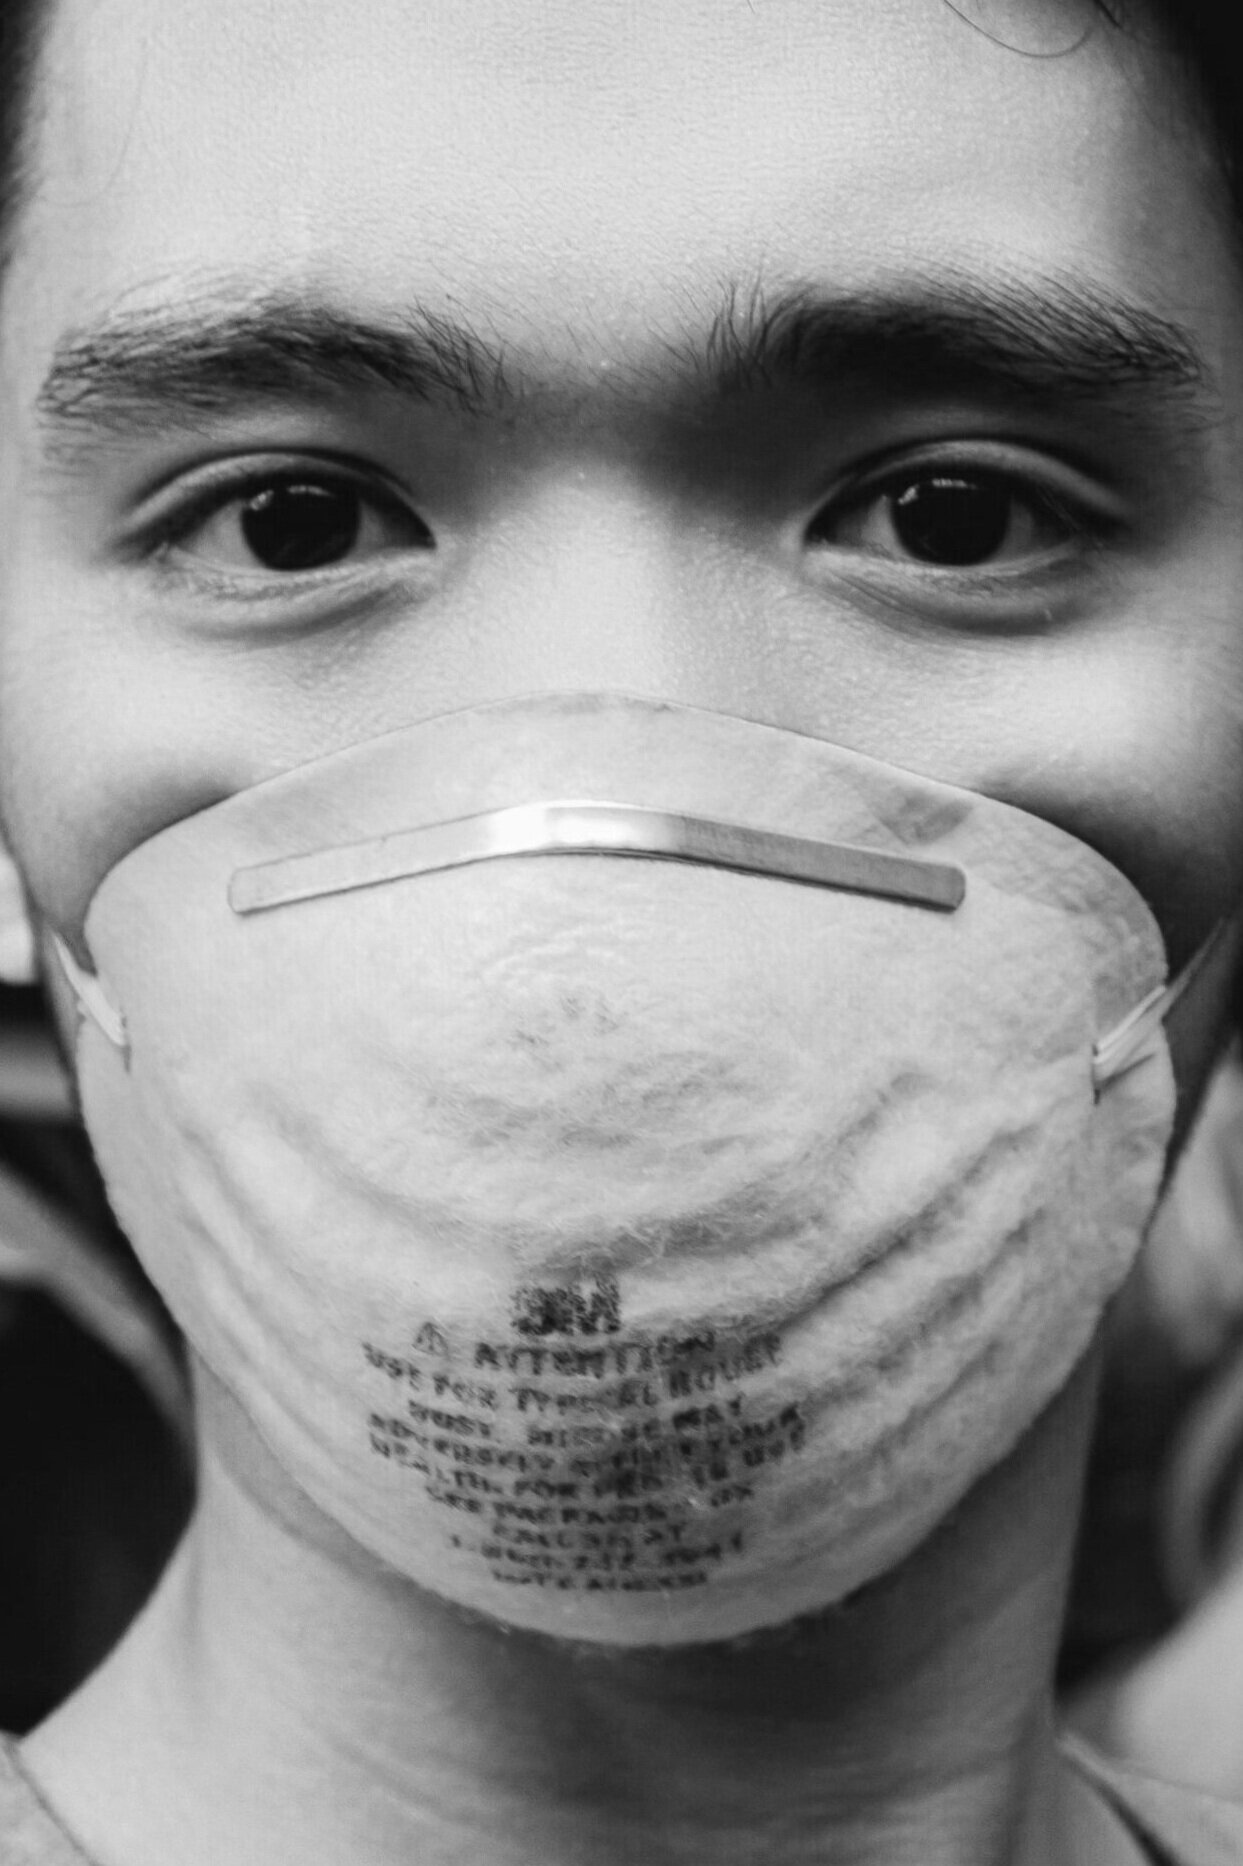 How Healthcare Workers Can Prevent Pressure Injuries From N95 Masks